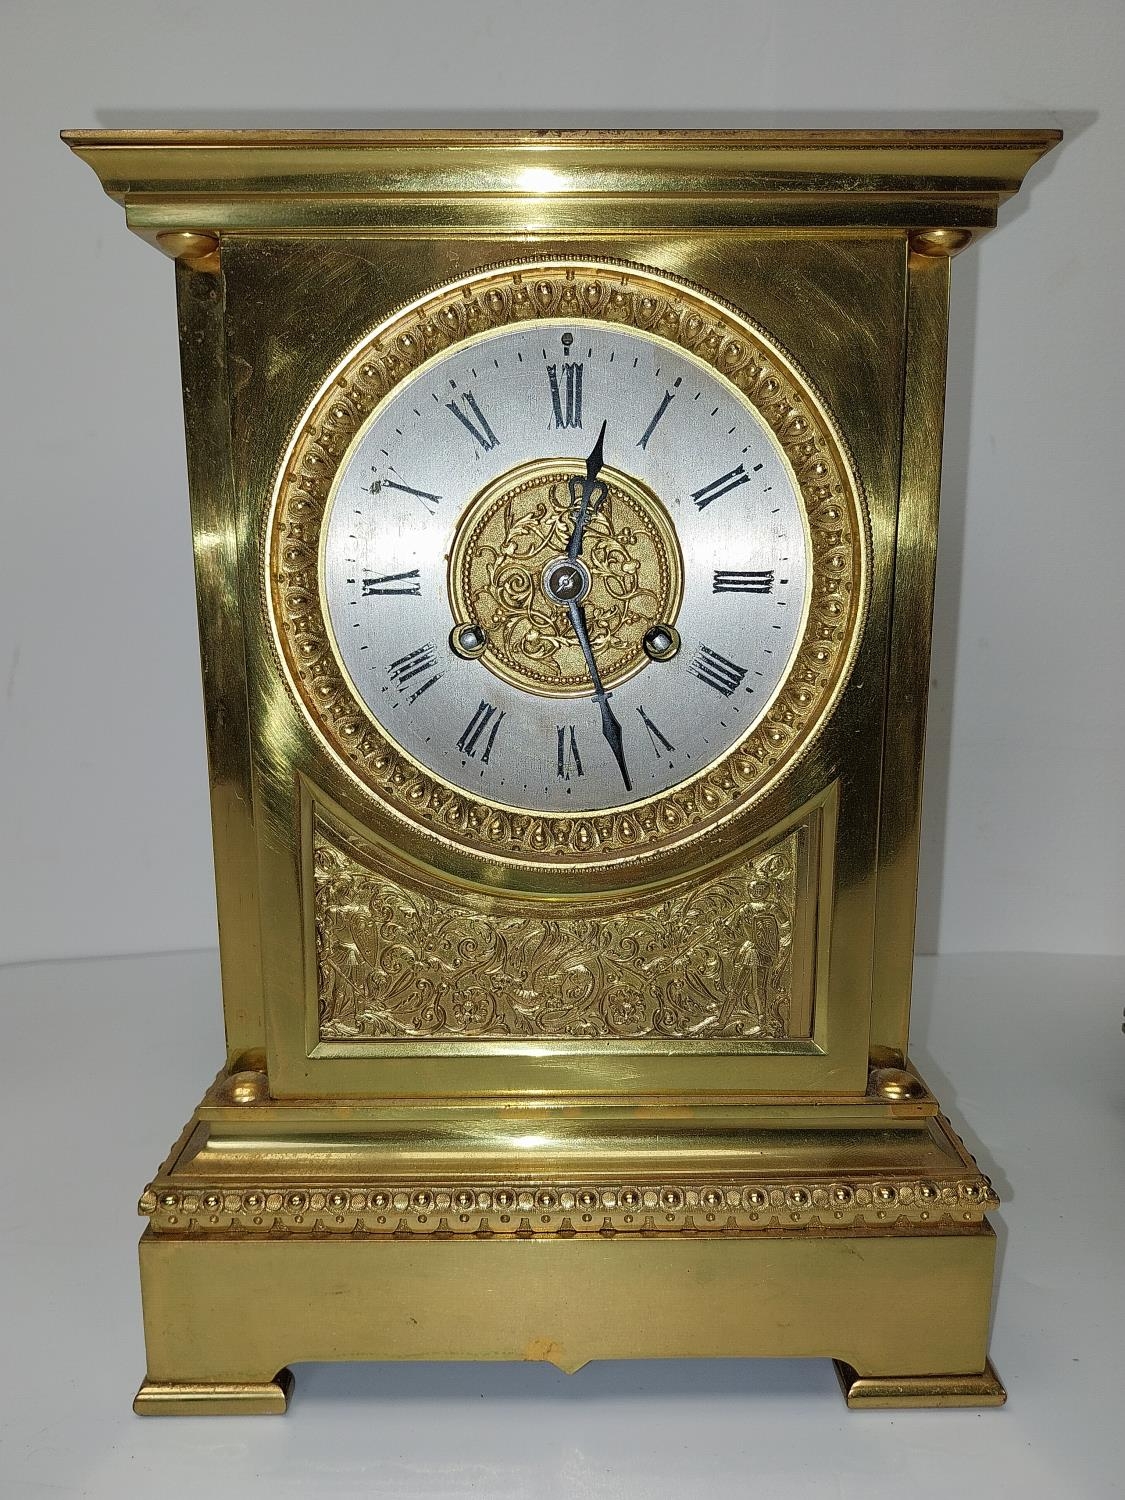 An early 20th century brass mantle clock with relief scrolling foliate and knight design, classical